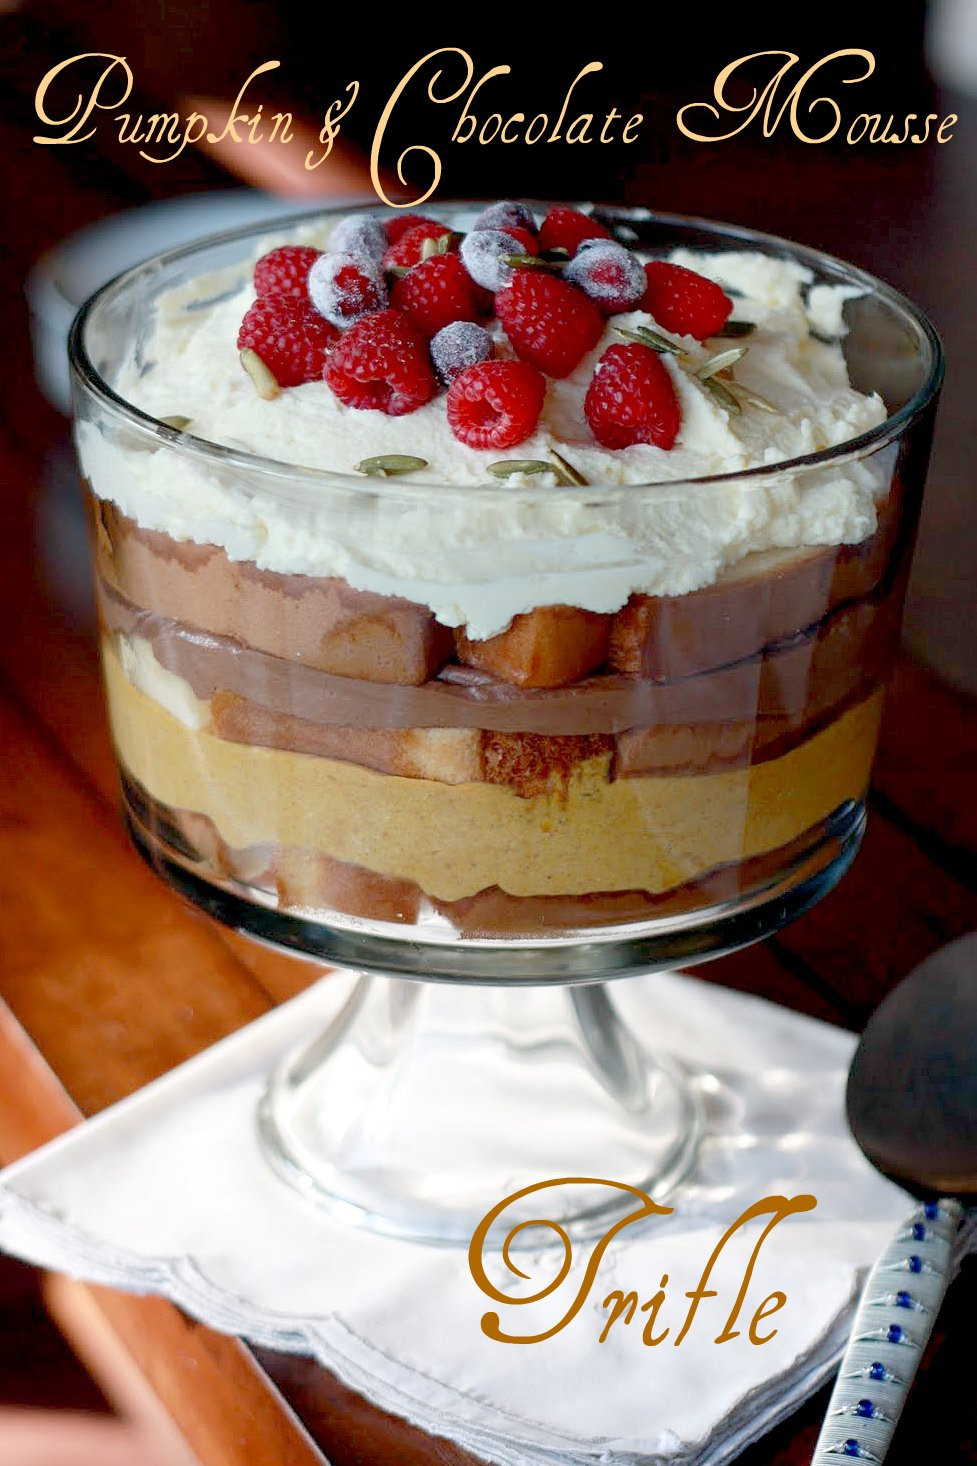 Chocolate Mousse Trifle
 Pumpkin and Chocolate Mousse Trifle